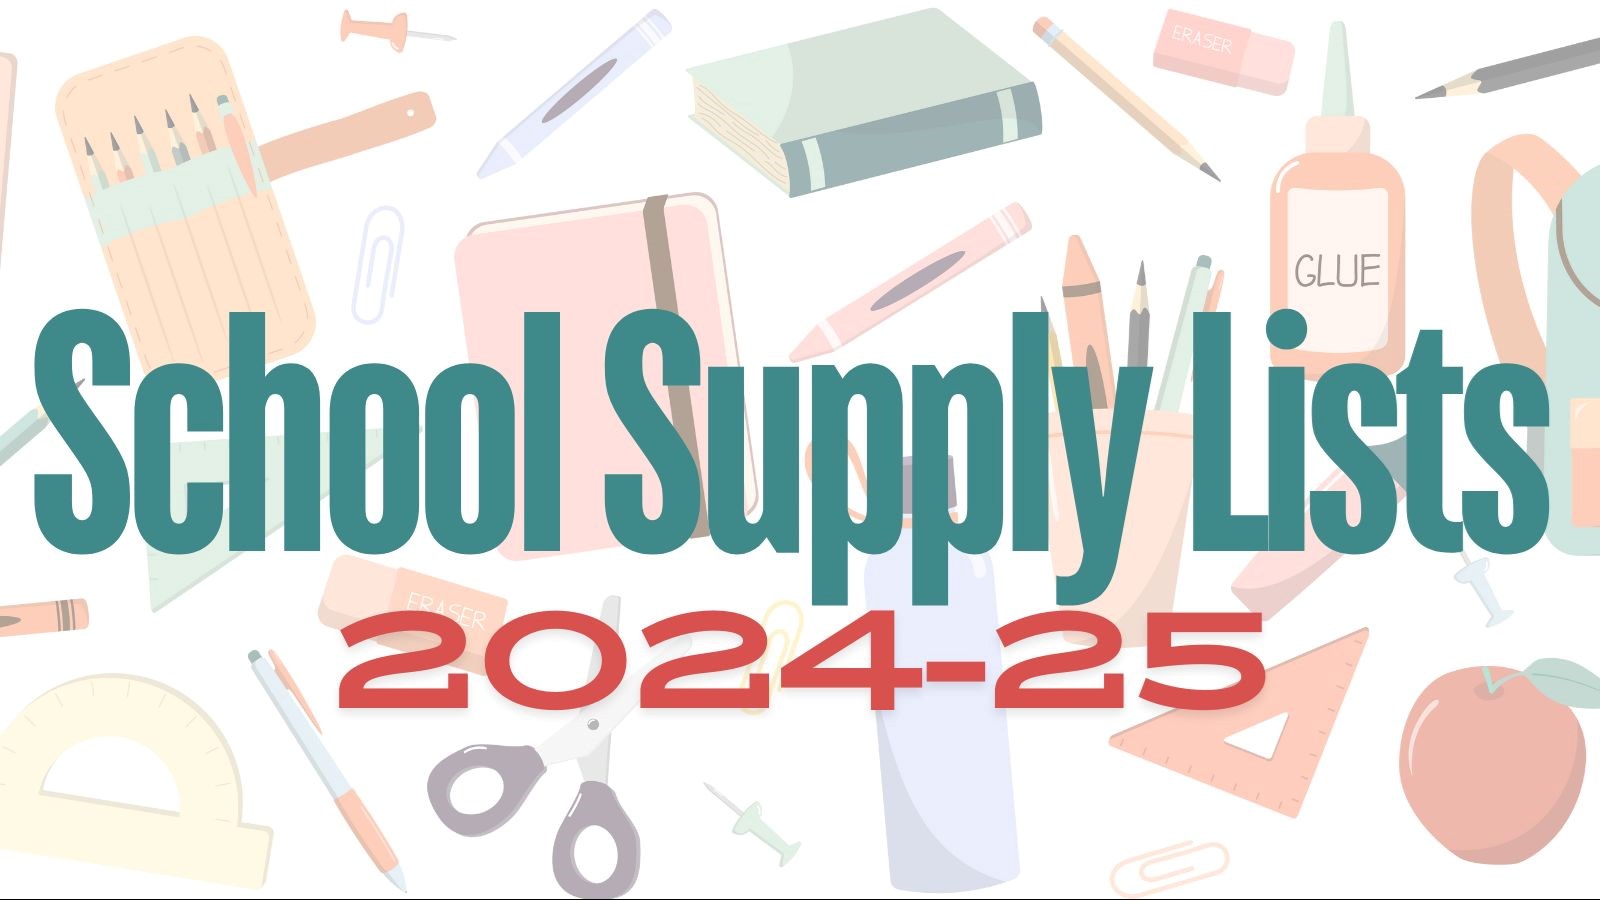 School Supply Lists for 2024 through 2025